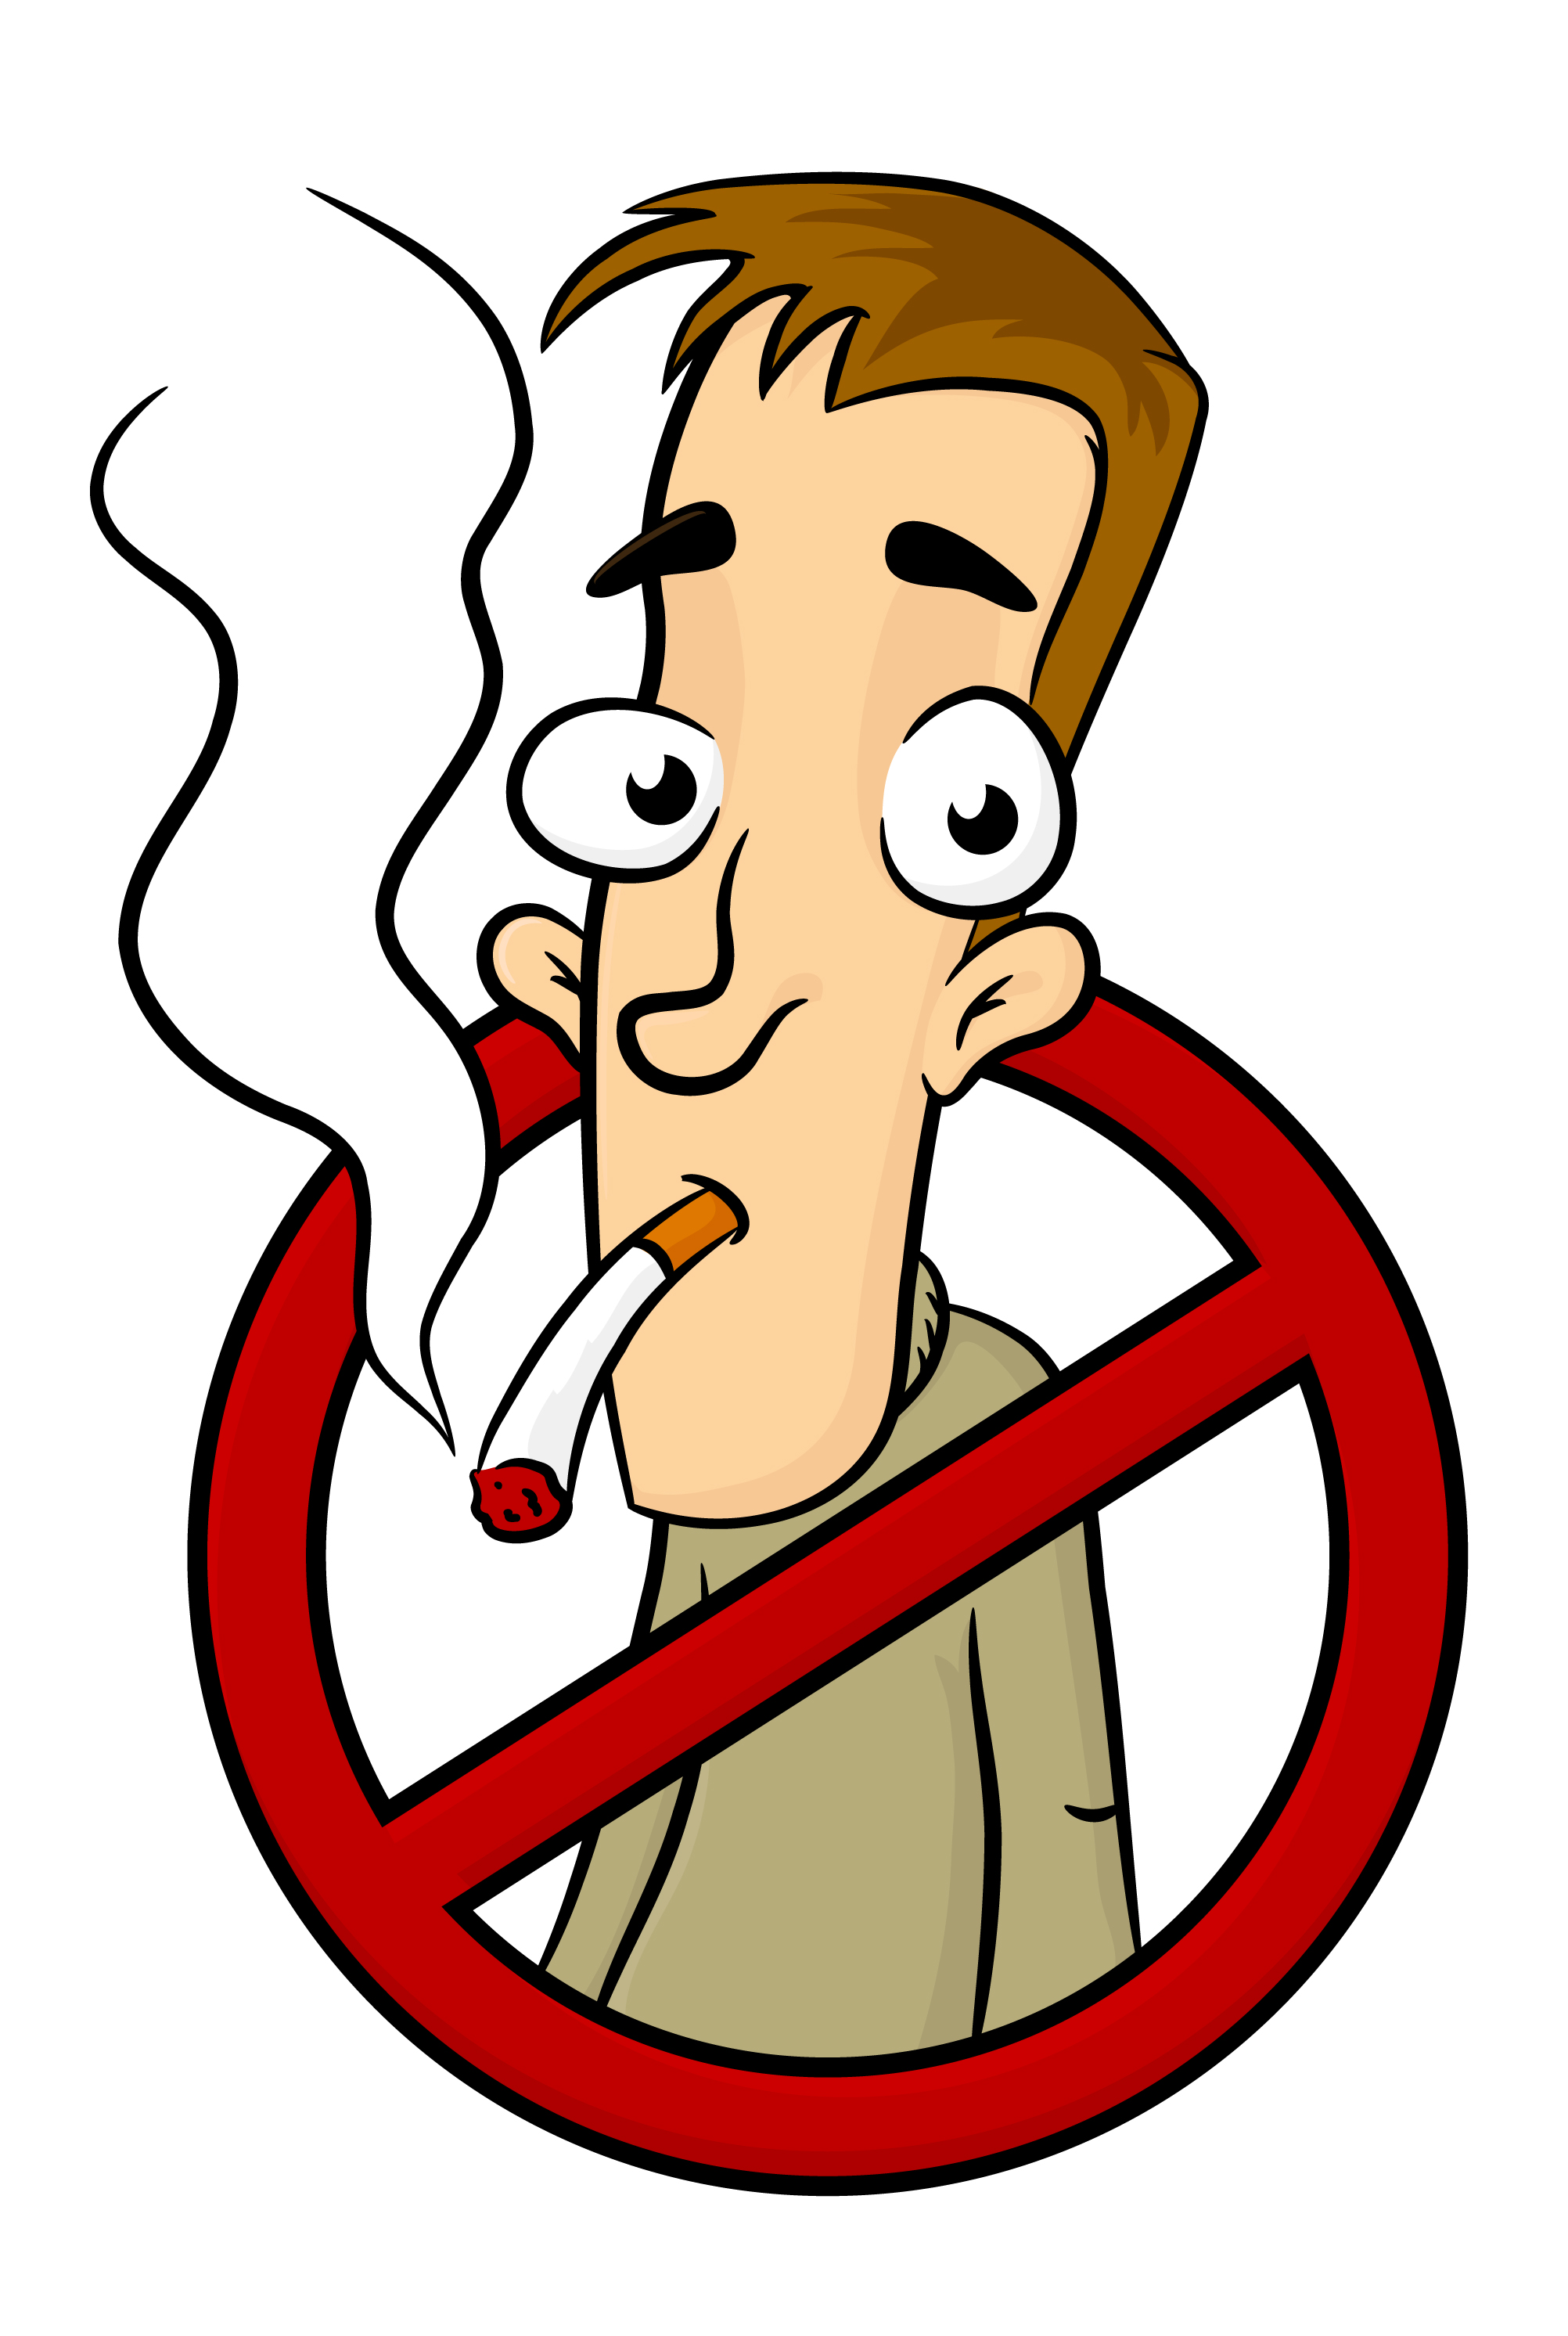 Say No To Drugs Clipart - ClipArt Best